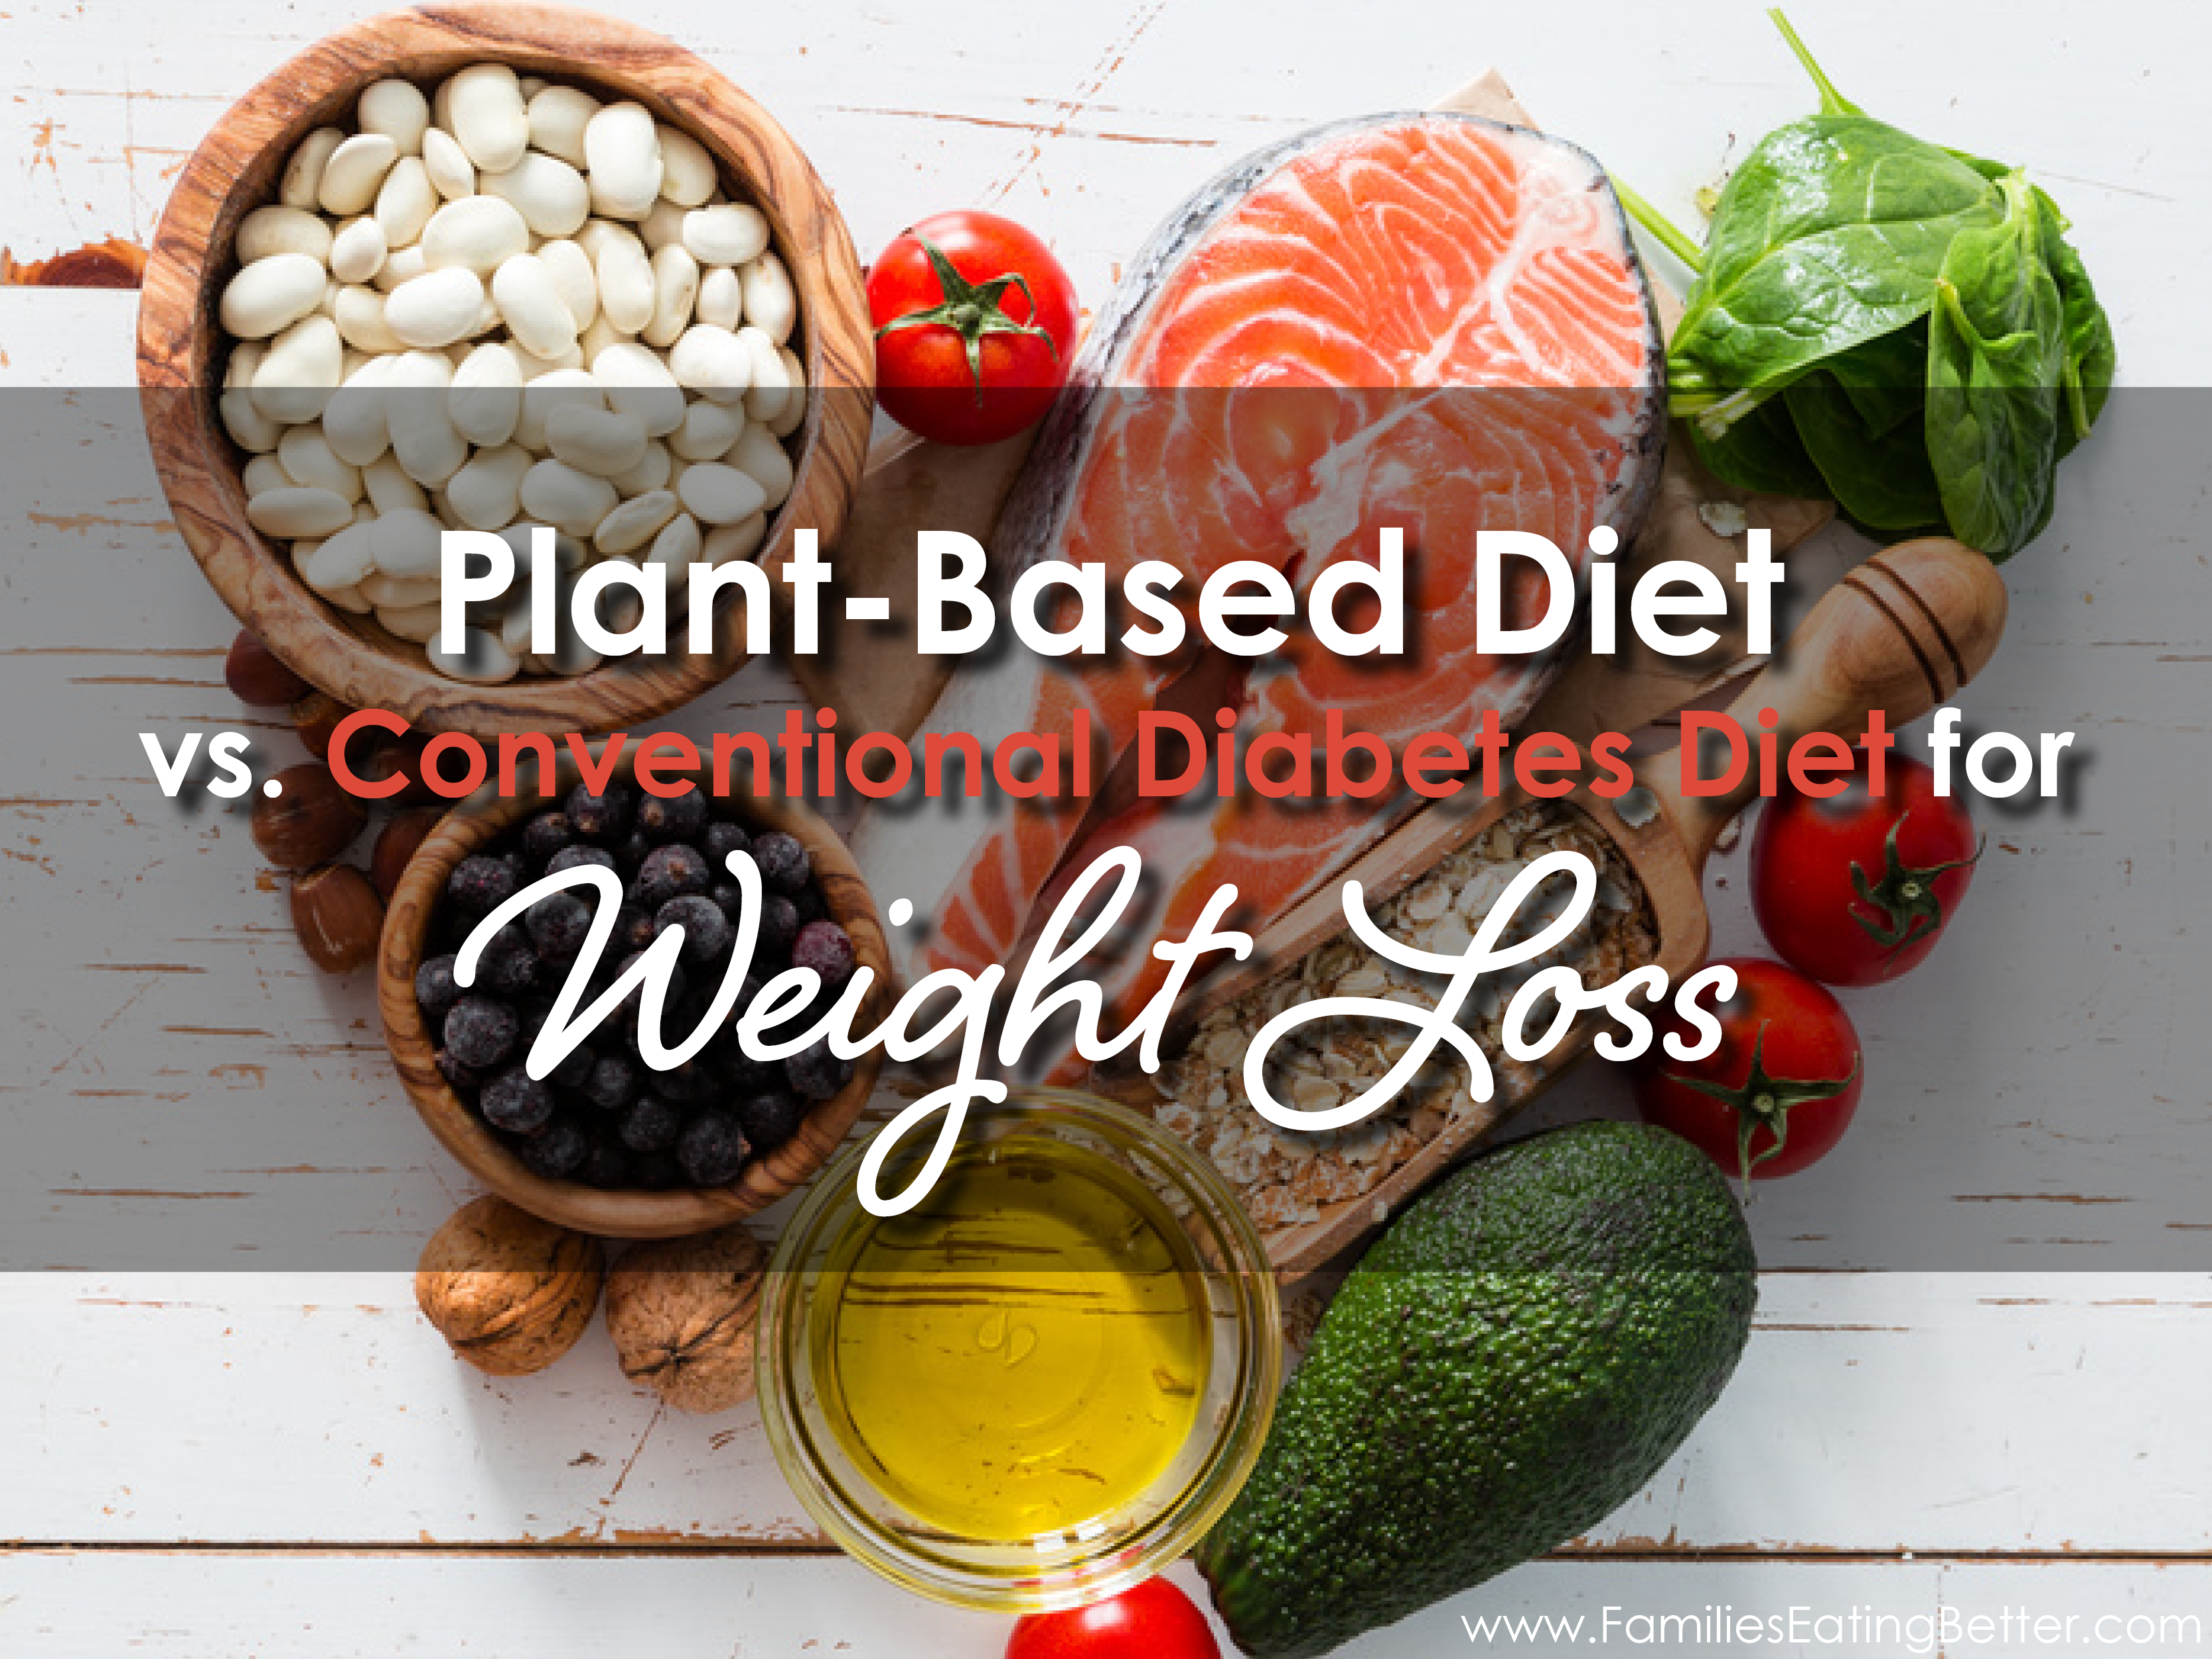 Plant-Based Diet vs. a Conventional Diabetes Diet for Weight Loss